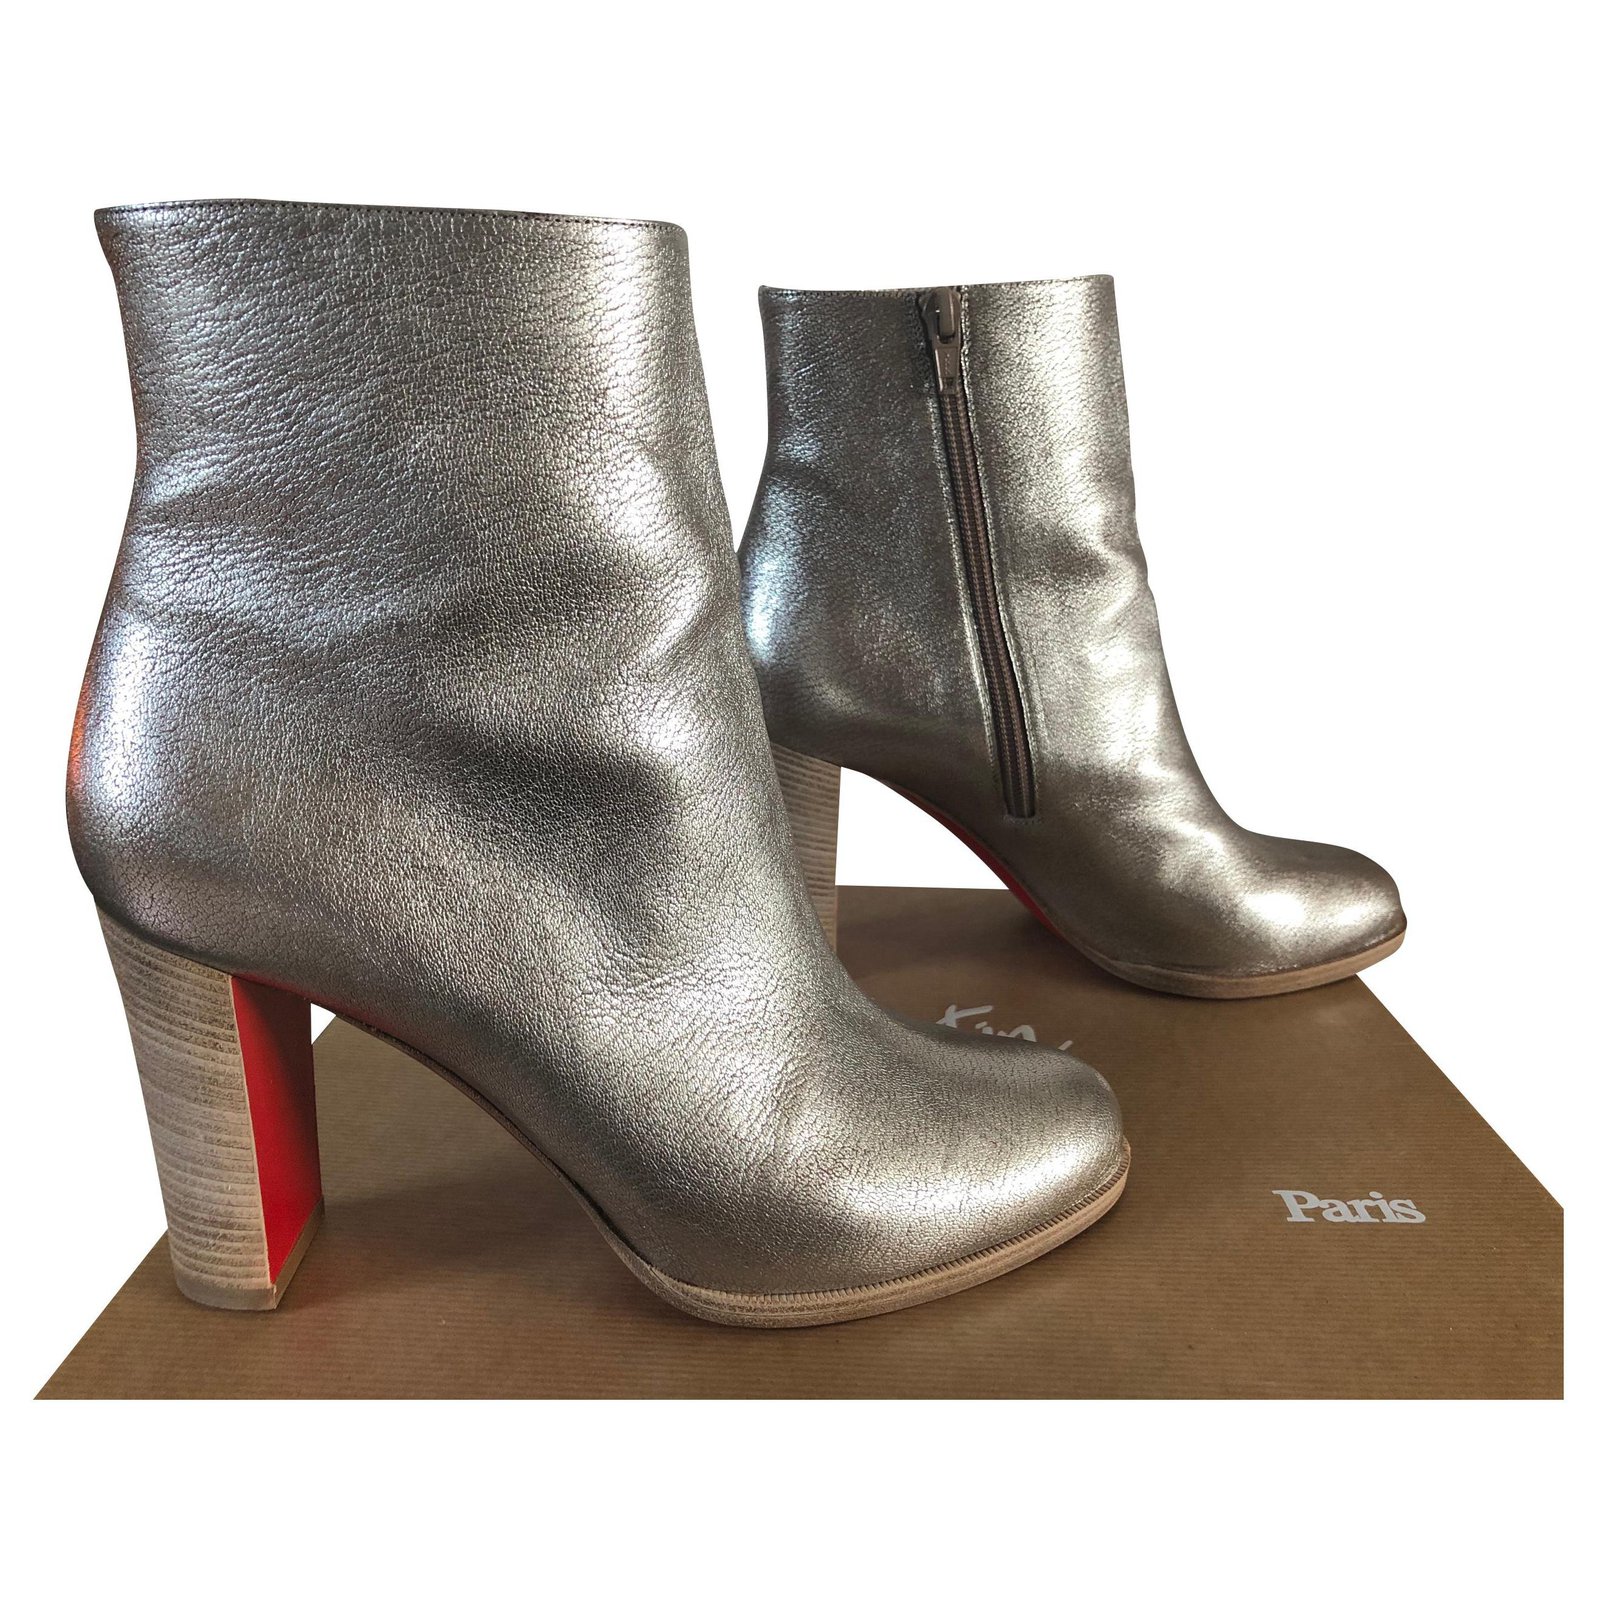 christian louboutin adox ankle boots